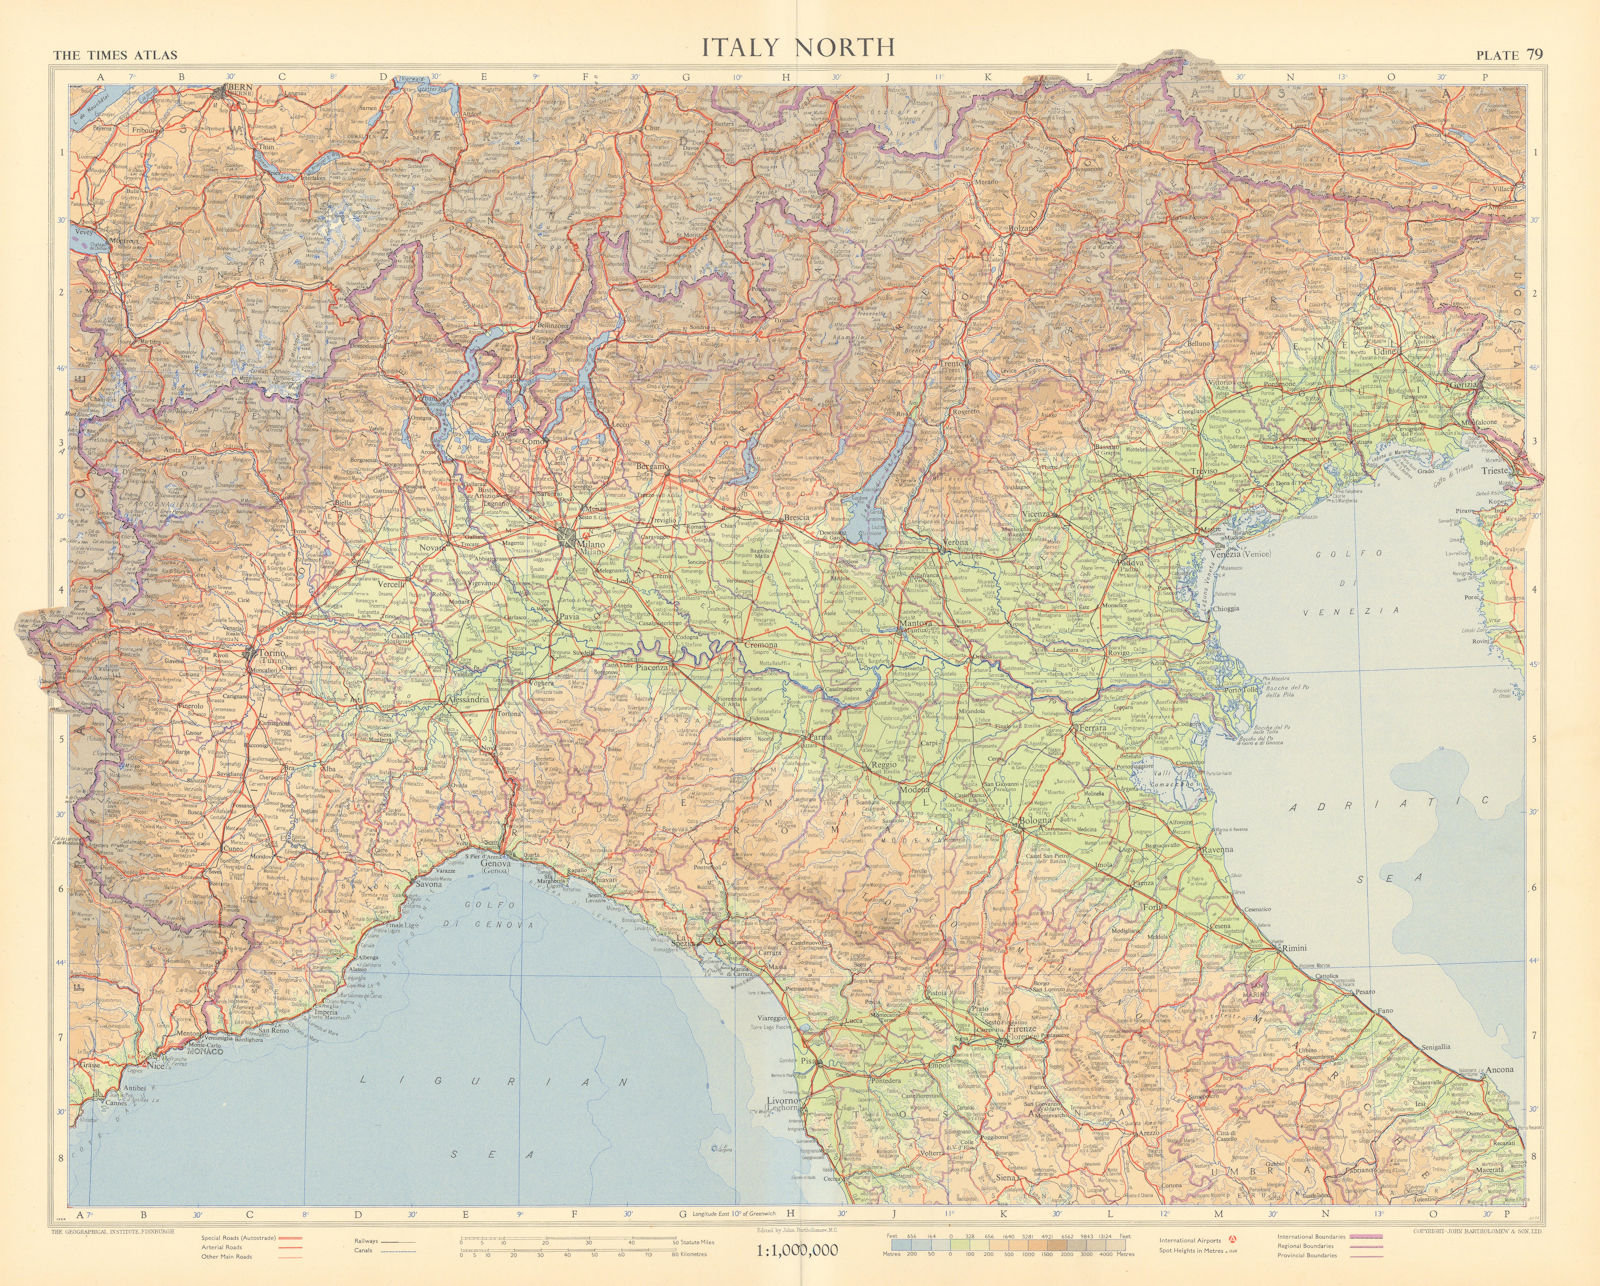 Associate Product Italy north. Road network Autostrade. TIMES 1956 old vintage map plan chart